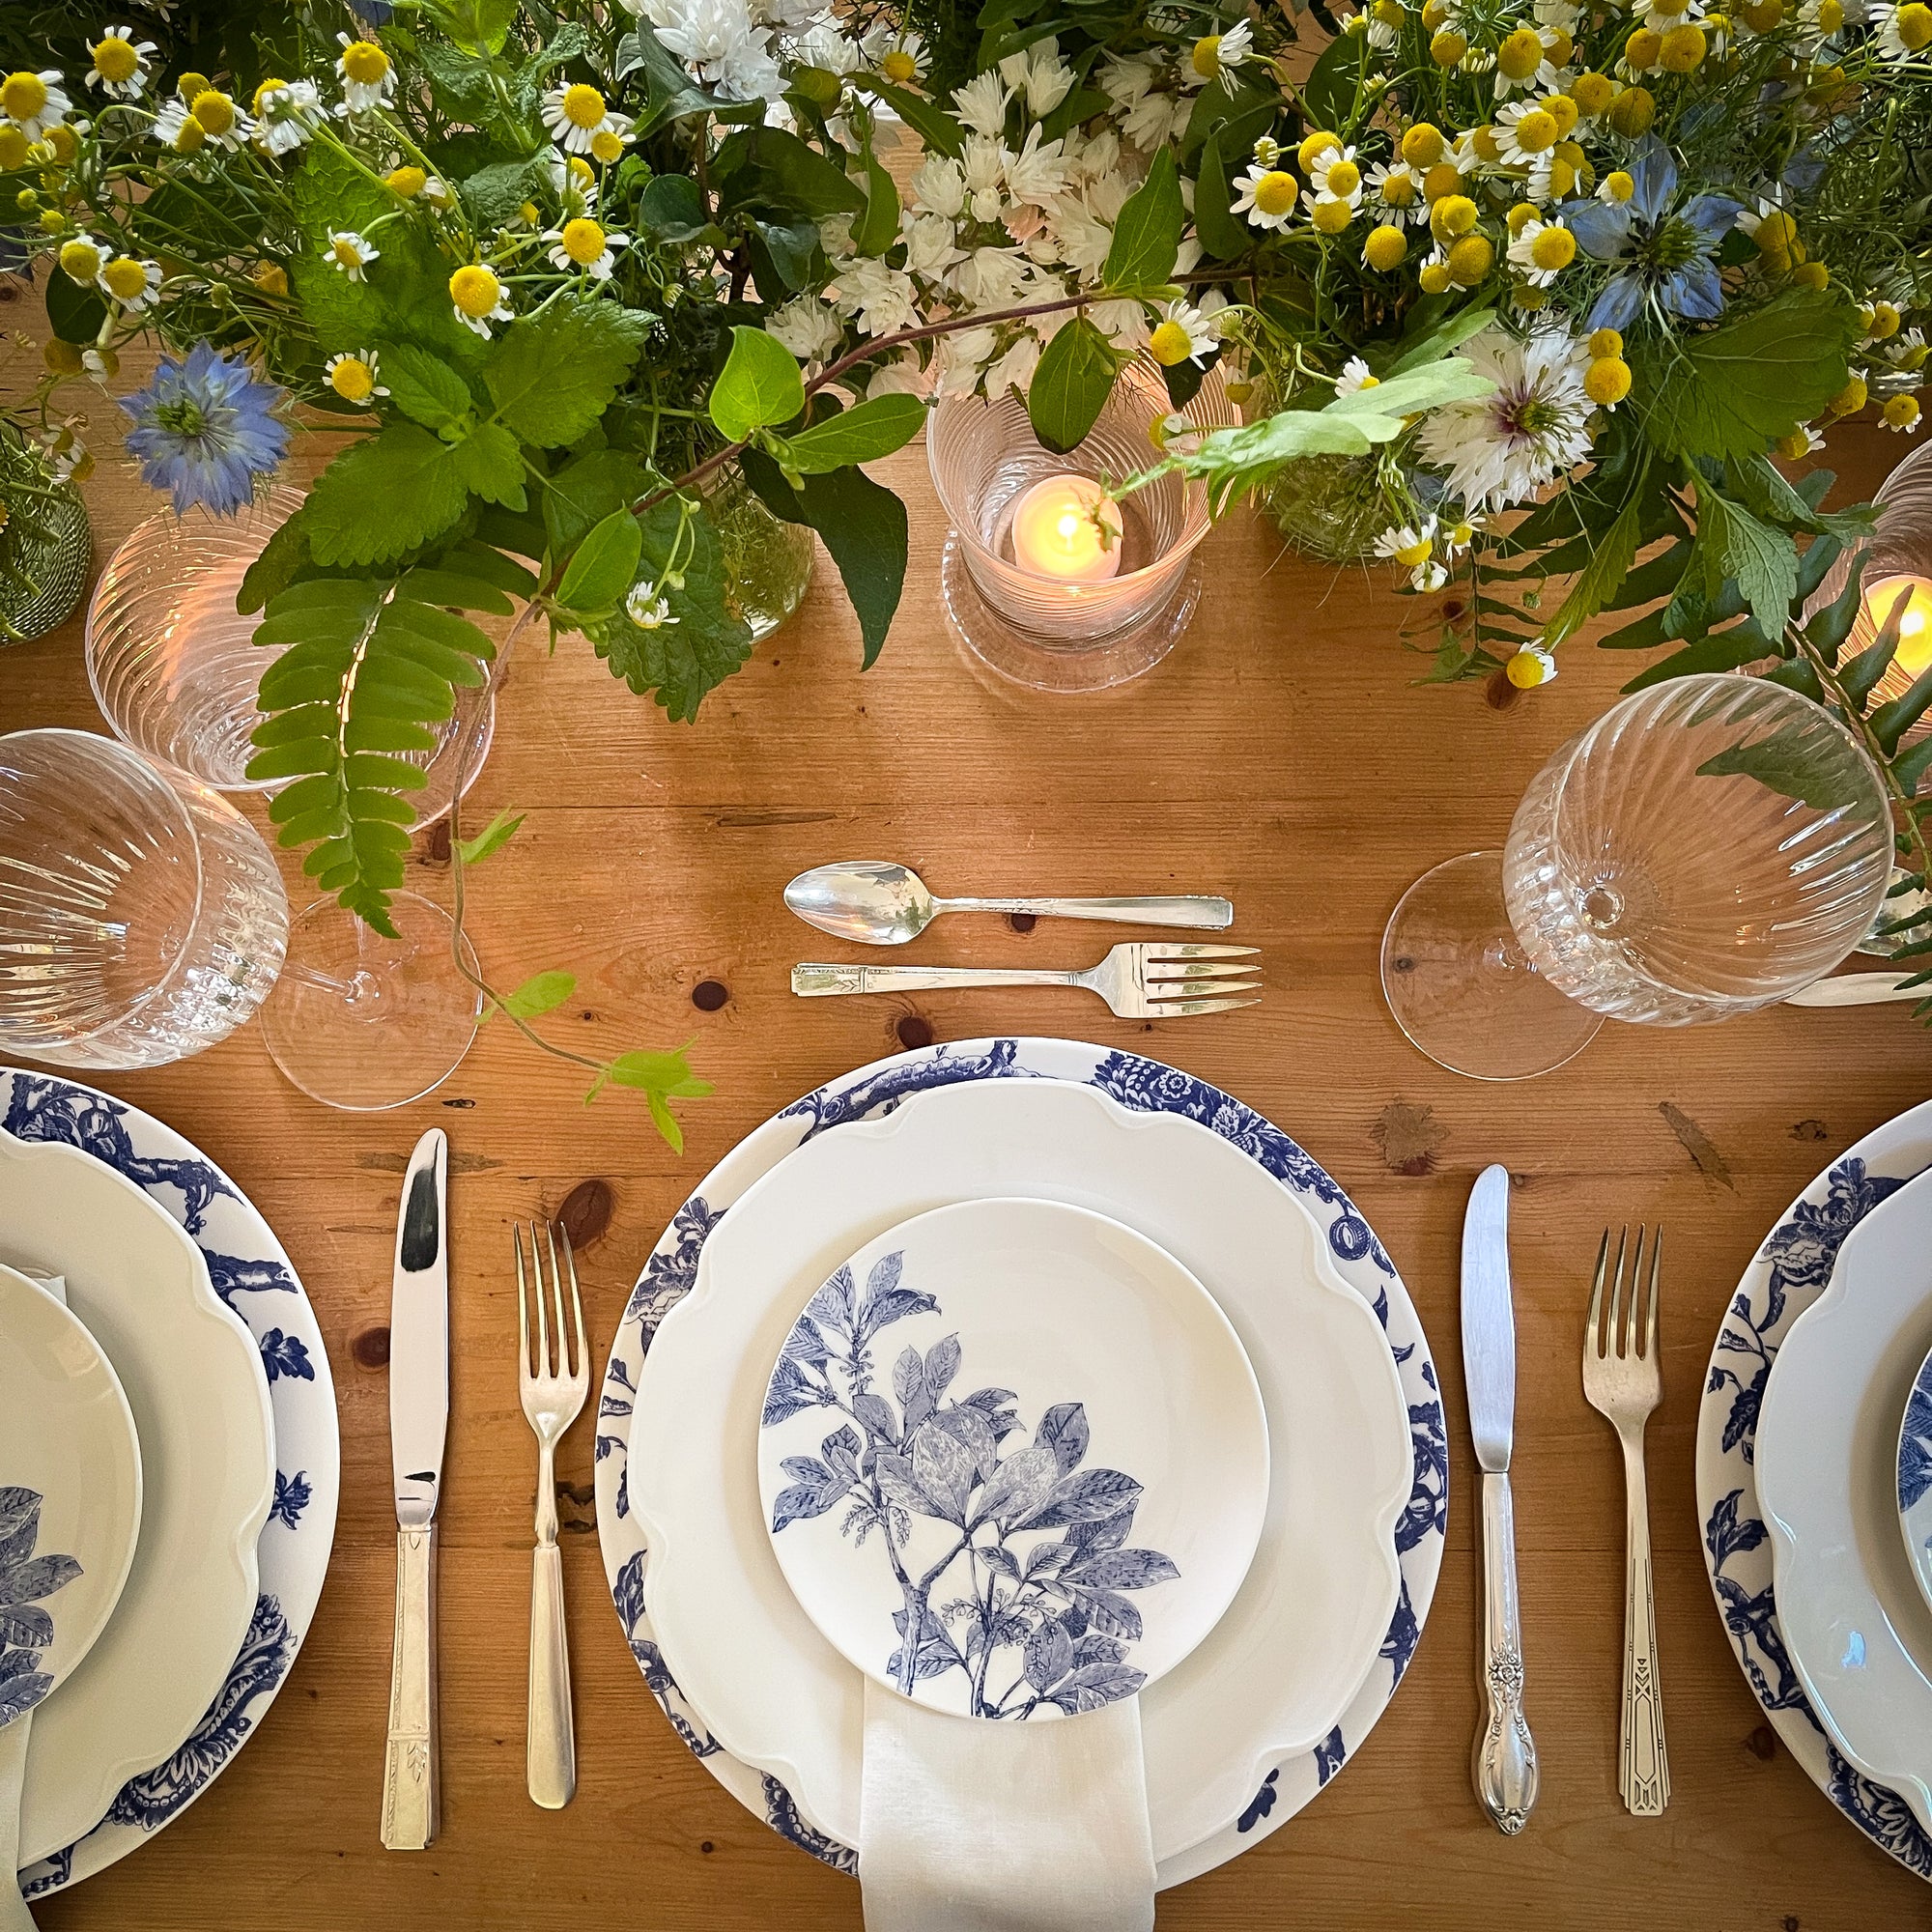 Set of four heirloom-quality Arbor Blue Small Plates from Caskata Artisanal Home in pristine white, adorned with blue botanical details on one side, arranged in a slightly overlapping manner.